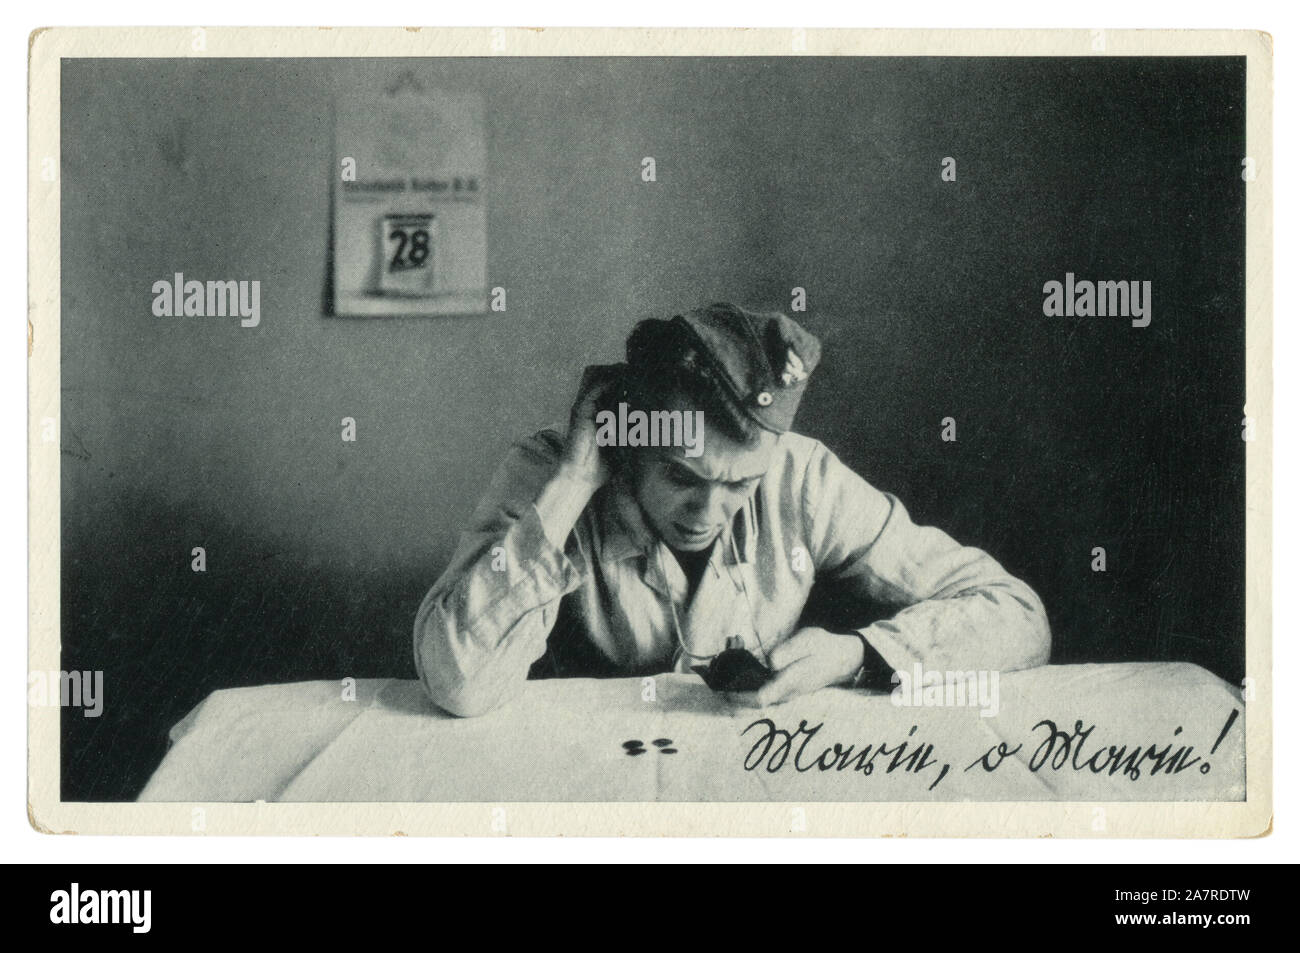 German historical photo postcard: Morning! Oh Morning! A Wehrmacht soldier is surprised as he counts the contents of his wallet. Germany, Third Reich Stock Photo